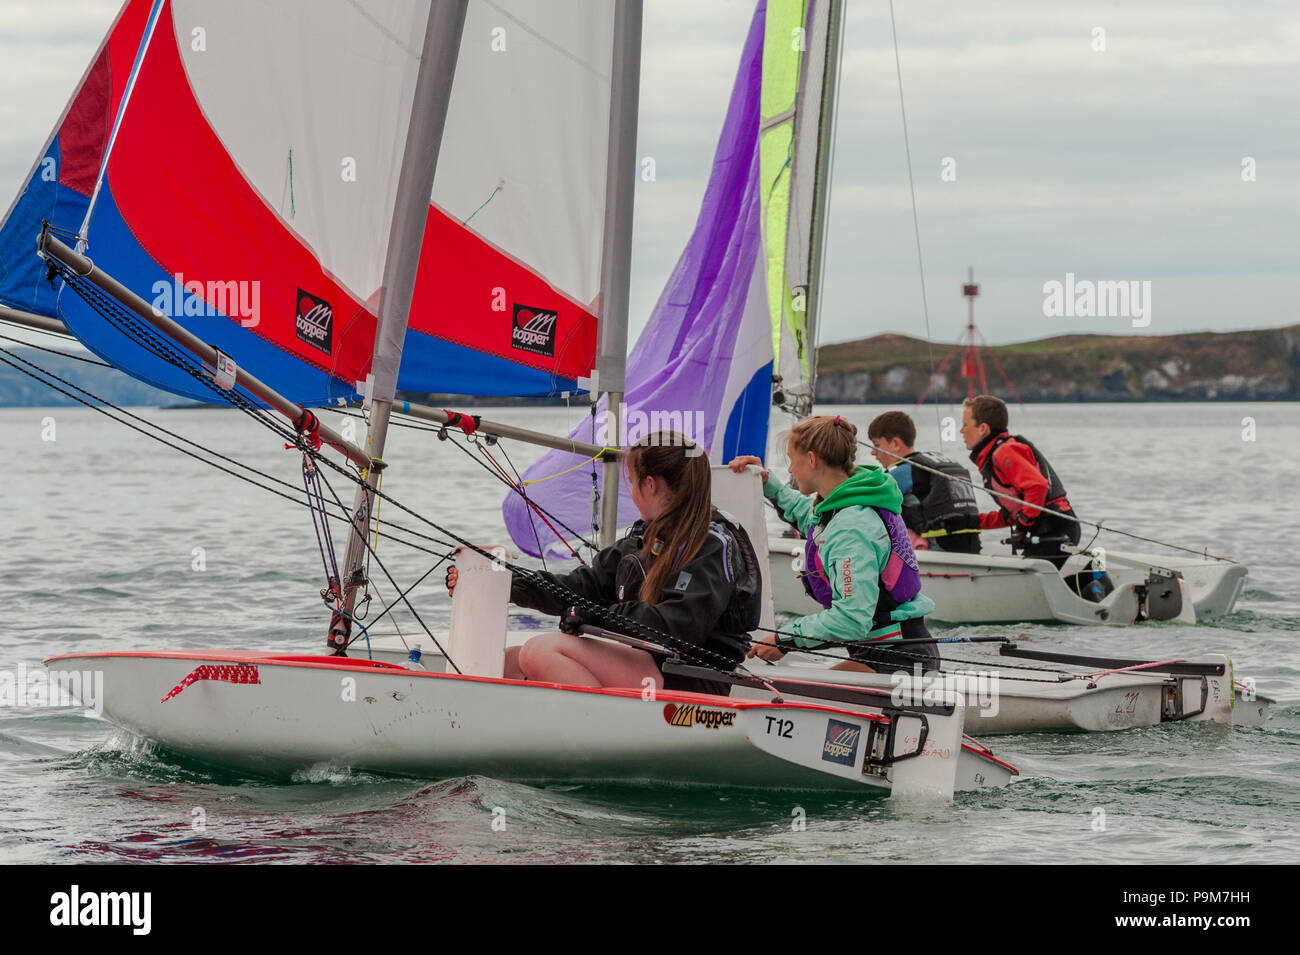 Schull, West Cork, Ireland. 19th July, 2018. Young people come from all over the island of Ireland, including the North, to take part in the schools regatta which is aimed at novice racing sailors. Credit: Andy Gibson/Alamy Live News. Stock Photo